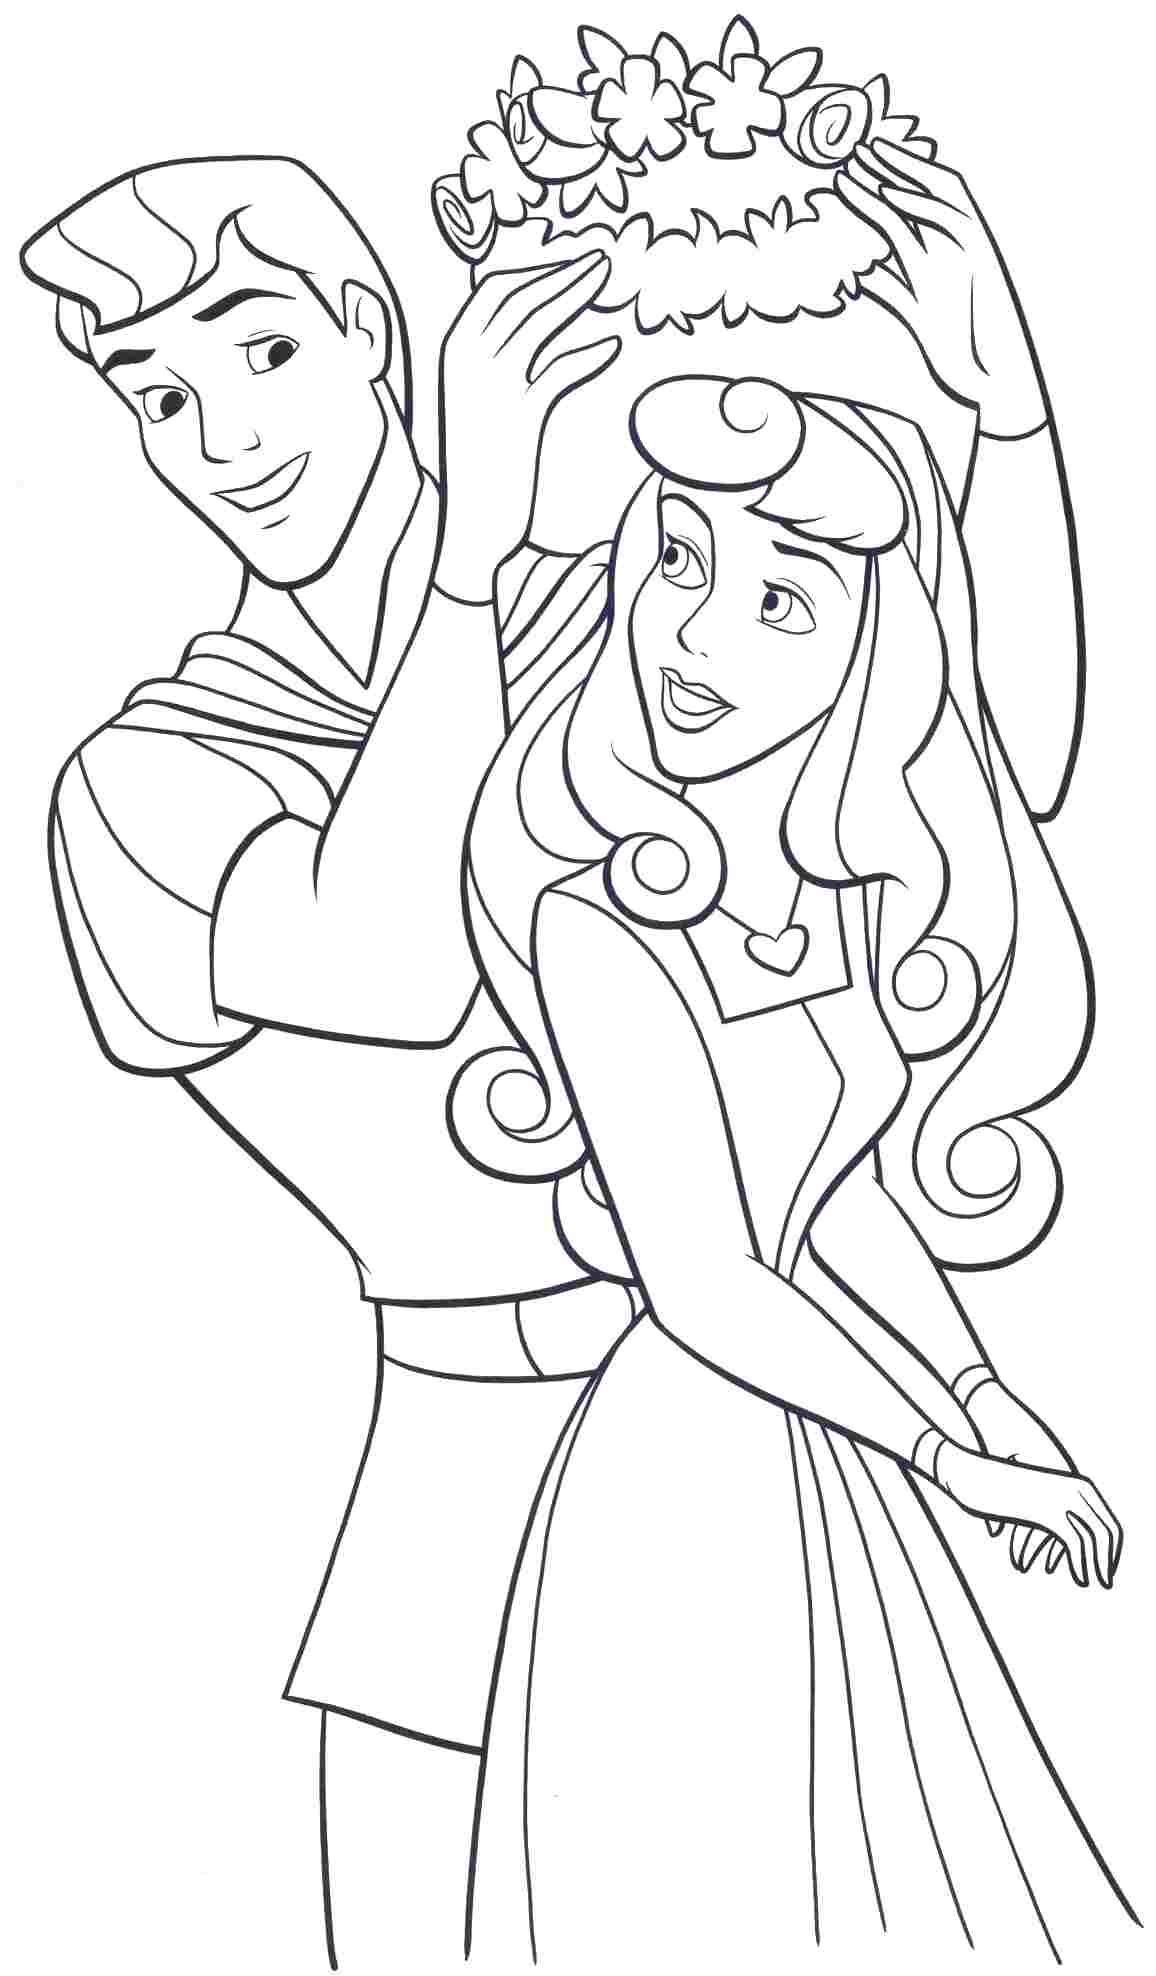 coloring-pages-sleeping-beauty